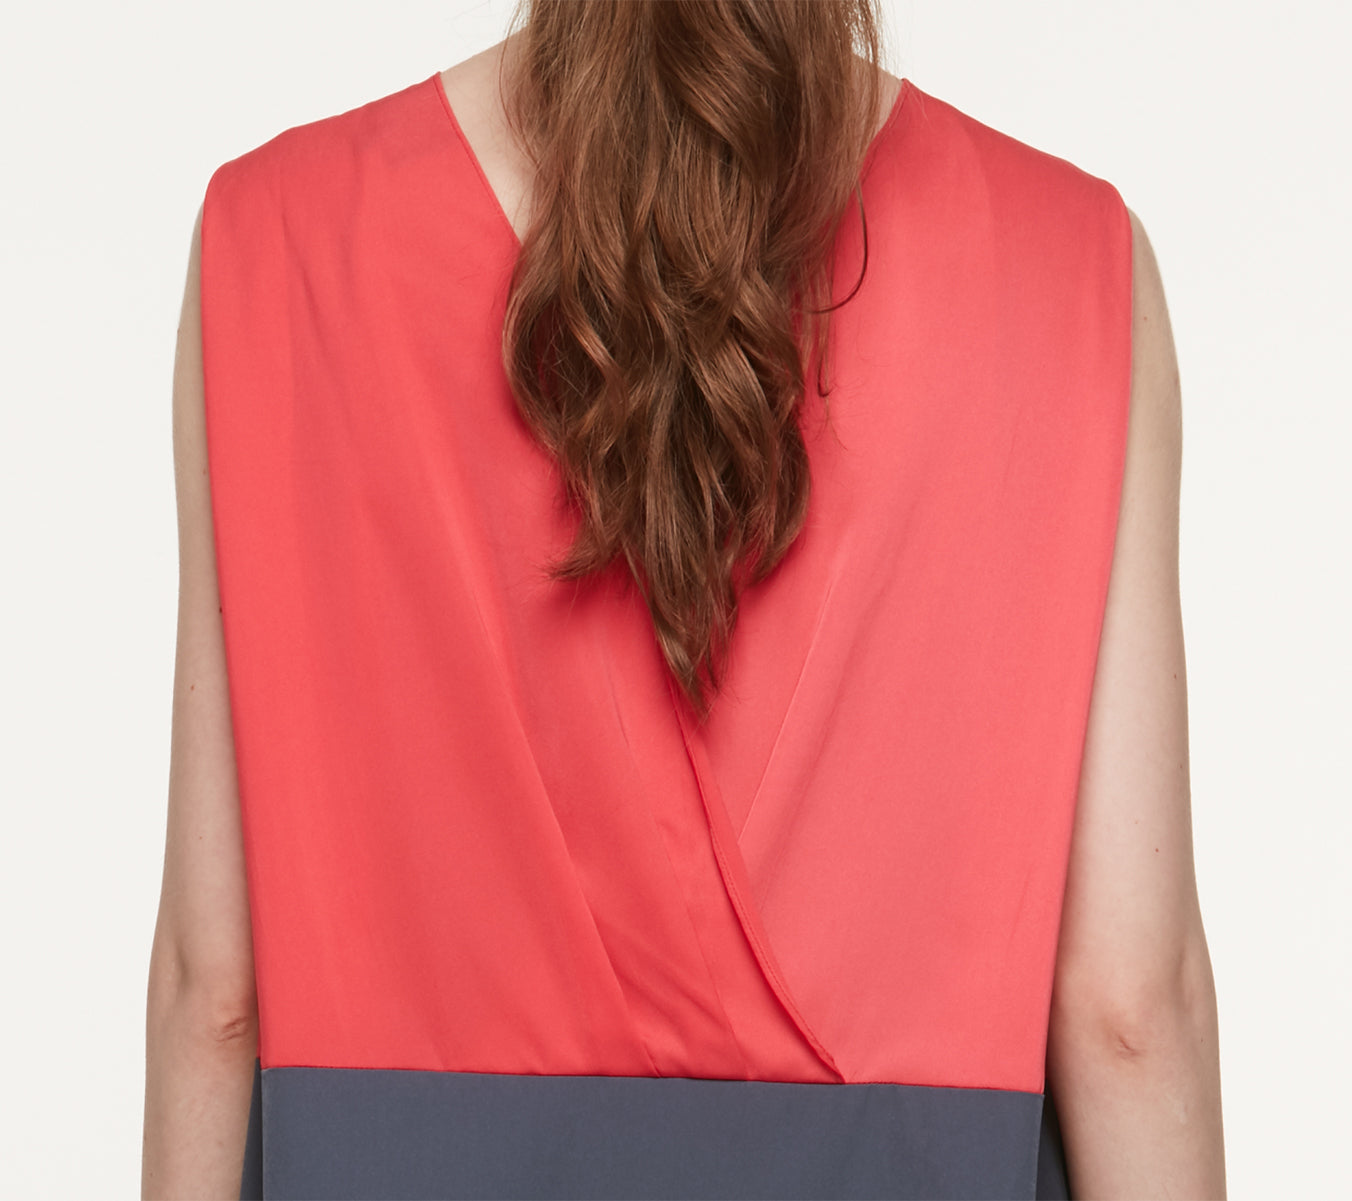 ROUND NECK DRESS WITH CONTRAST BACK PANEL